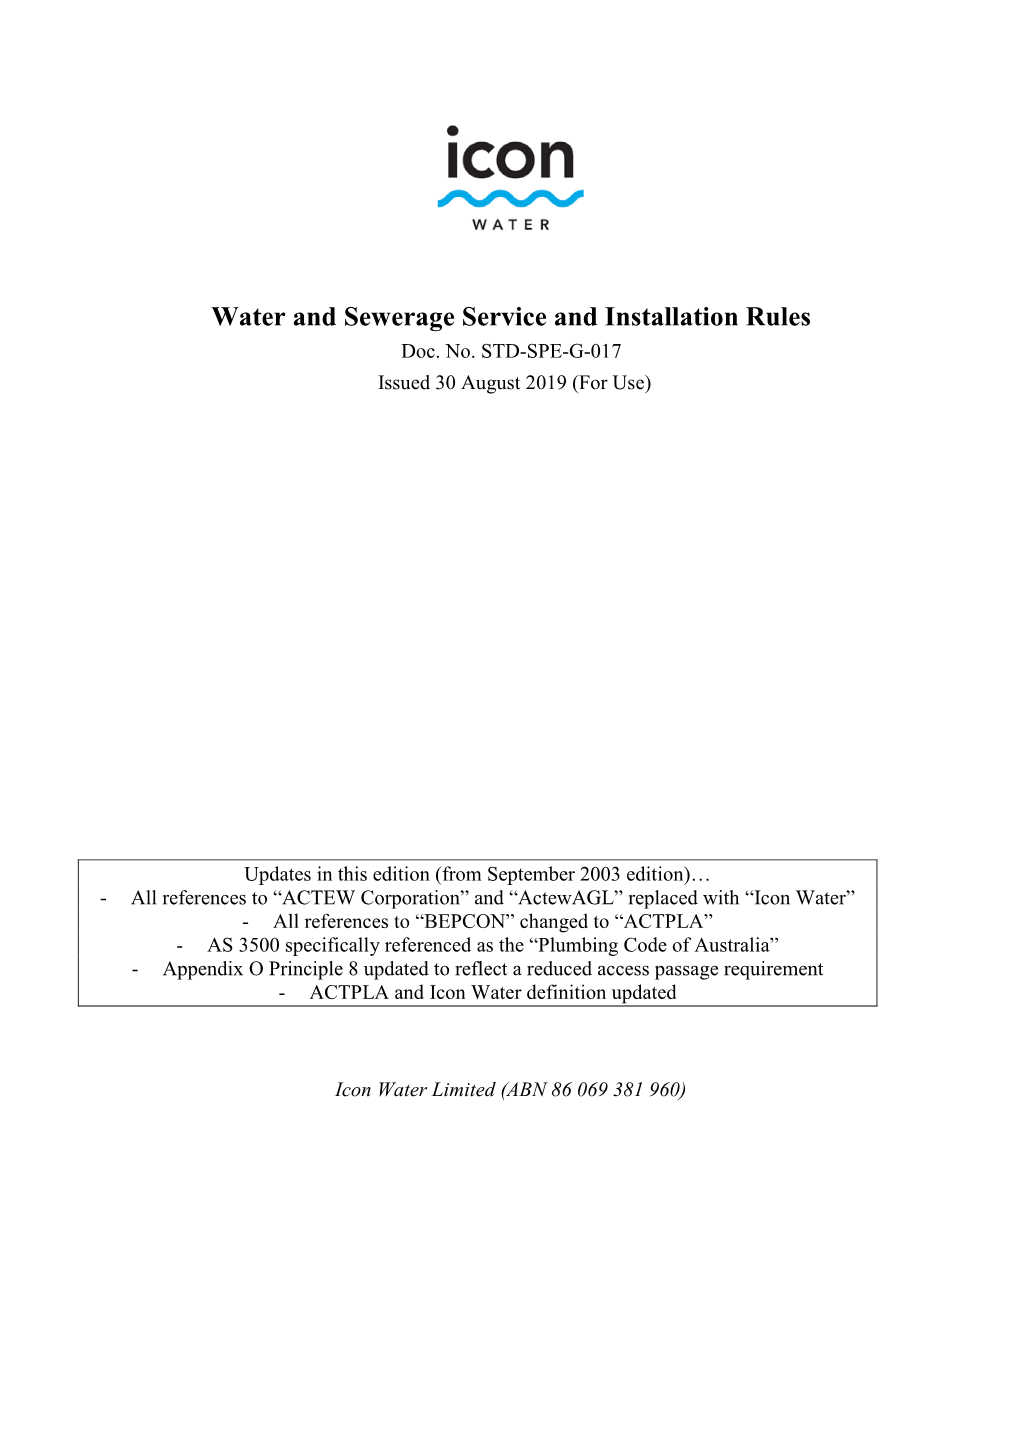 Water and Sewerage Service and Installation Rules Doc